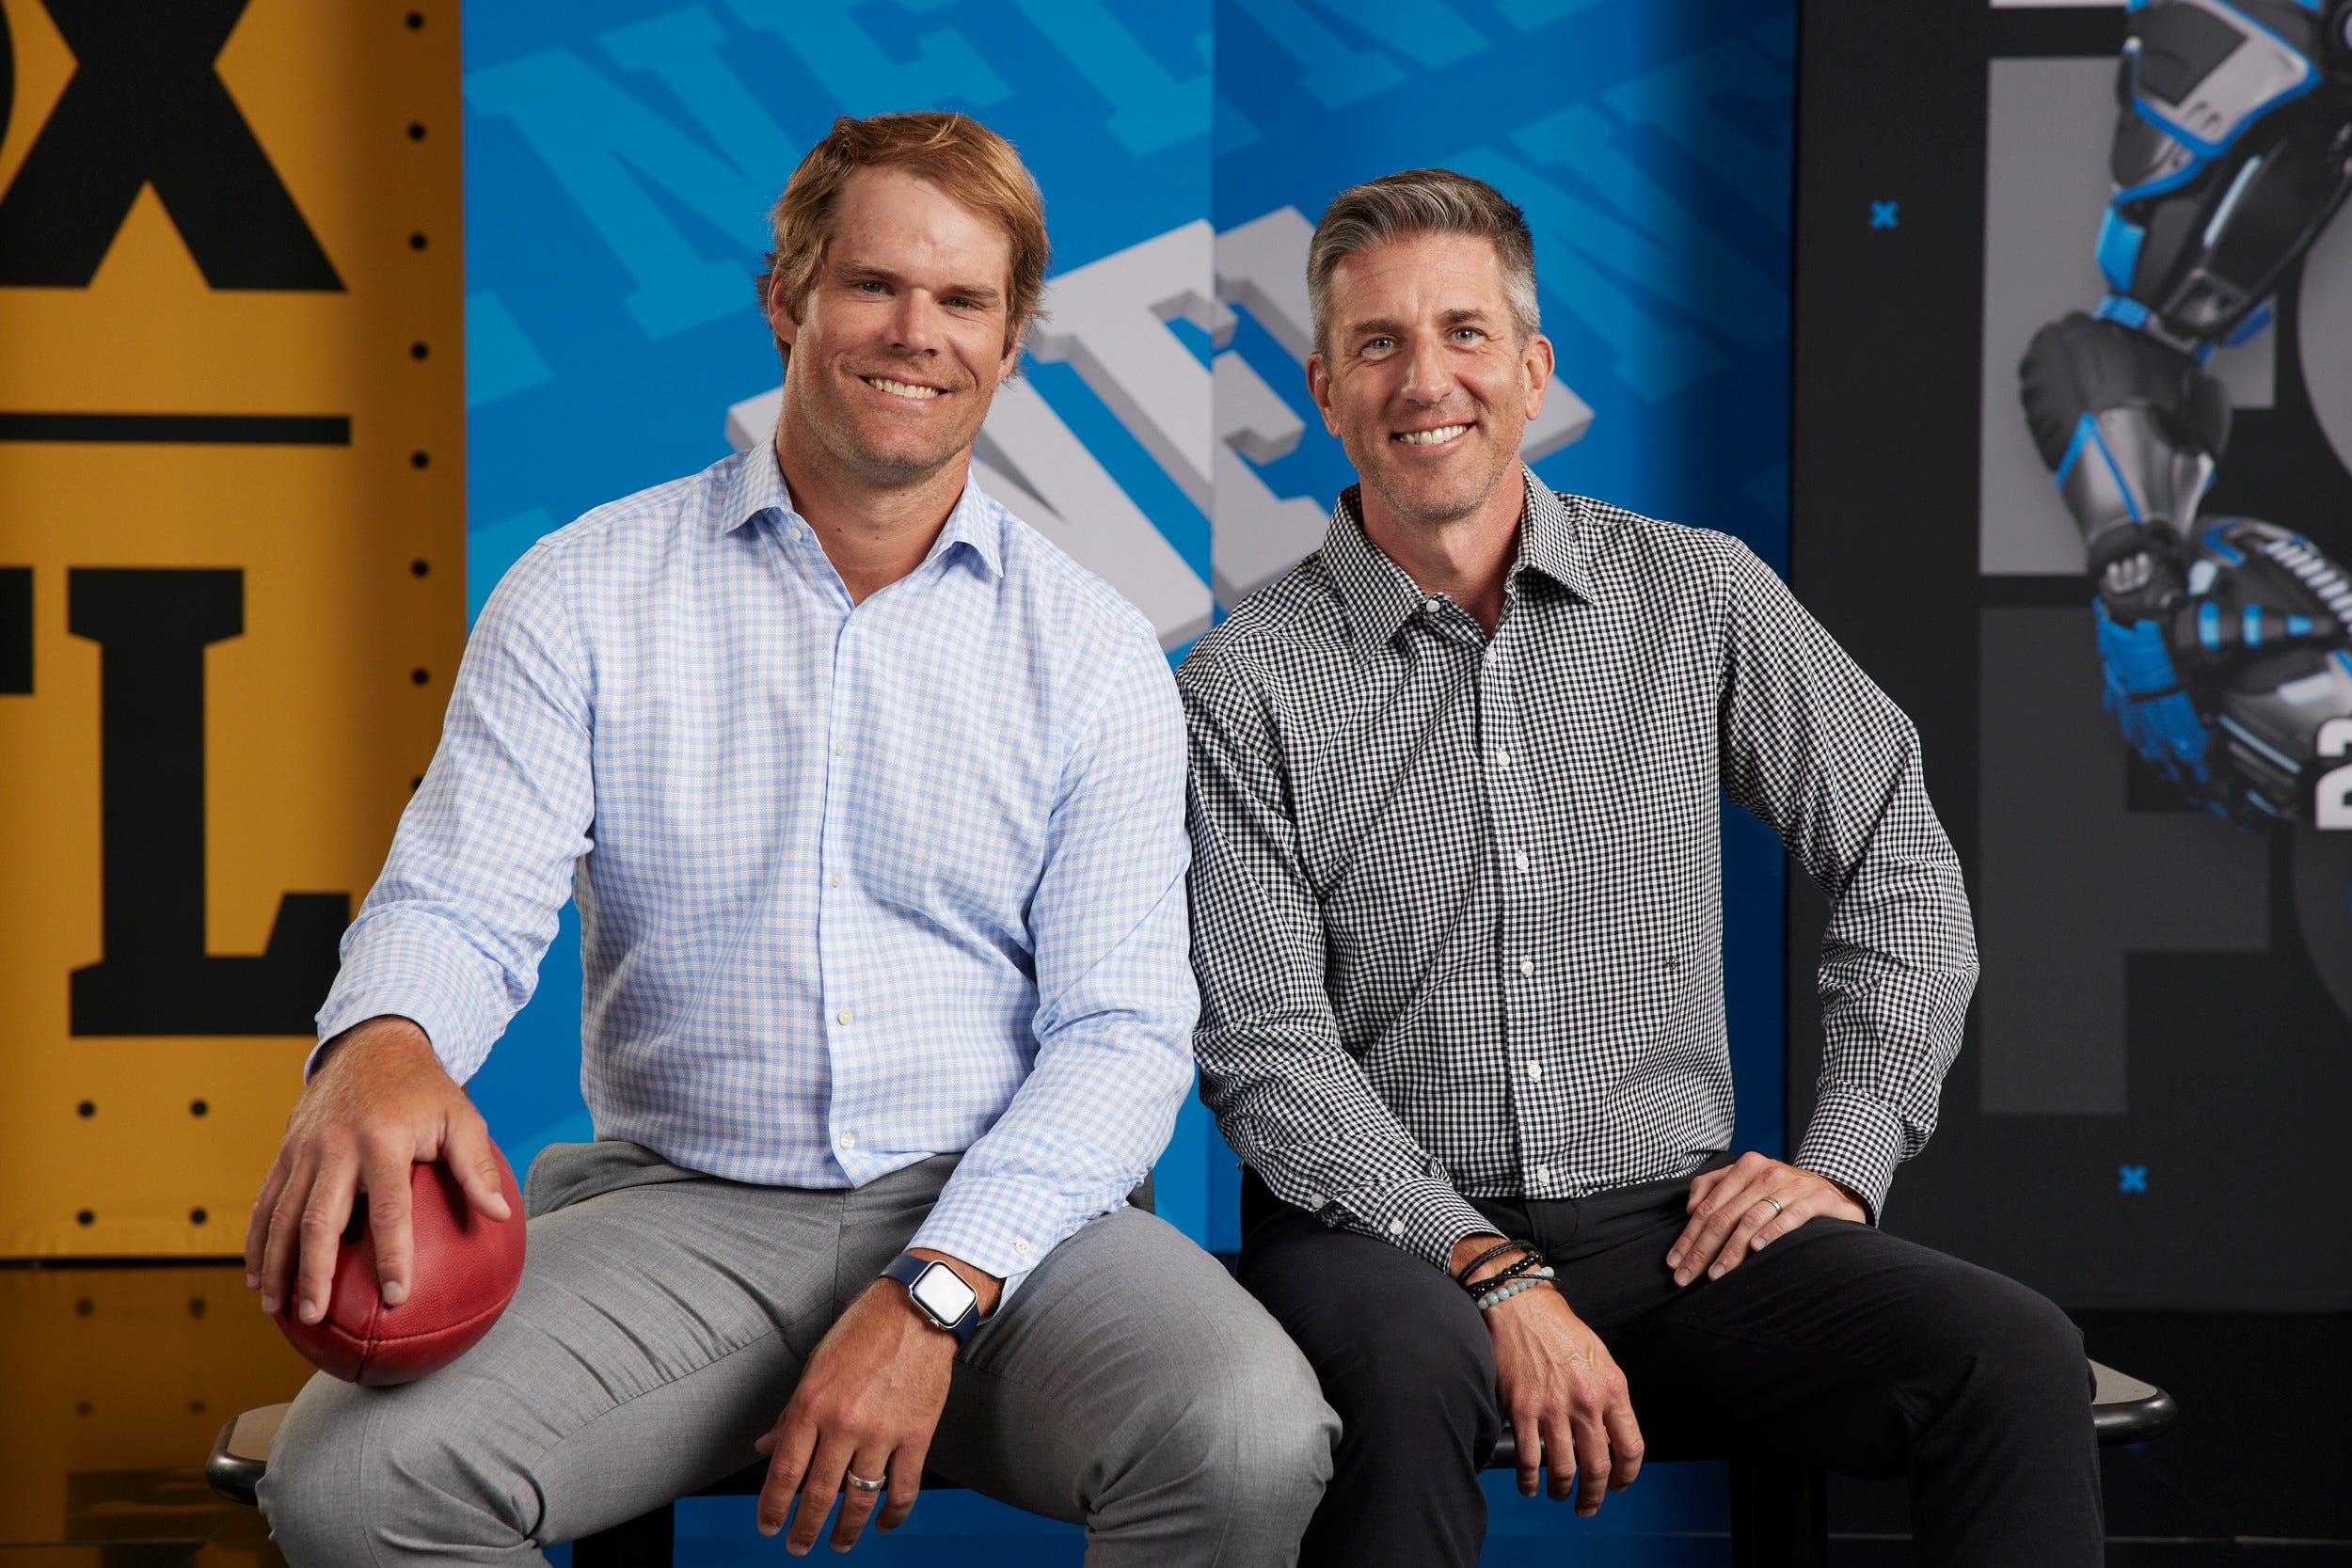 Greg Olsen (left) and Kevin Burkhardt (right) will be on the call of New Orleans Saints vs. Tampa Bay Buccaneers NFL Week 17 game.